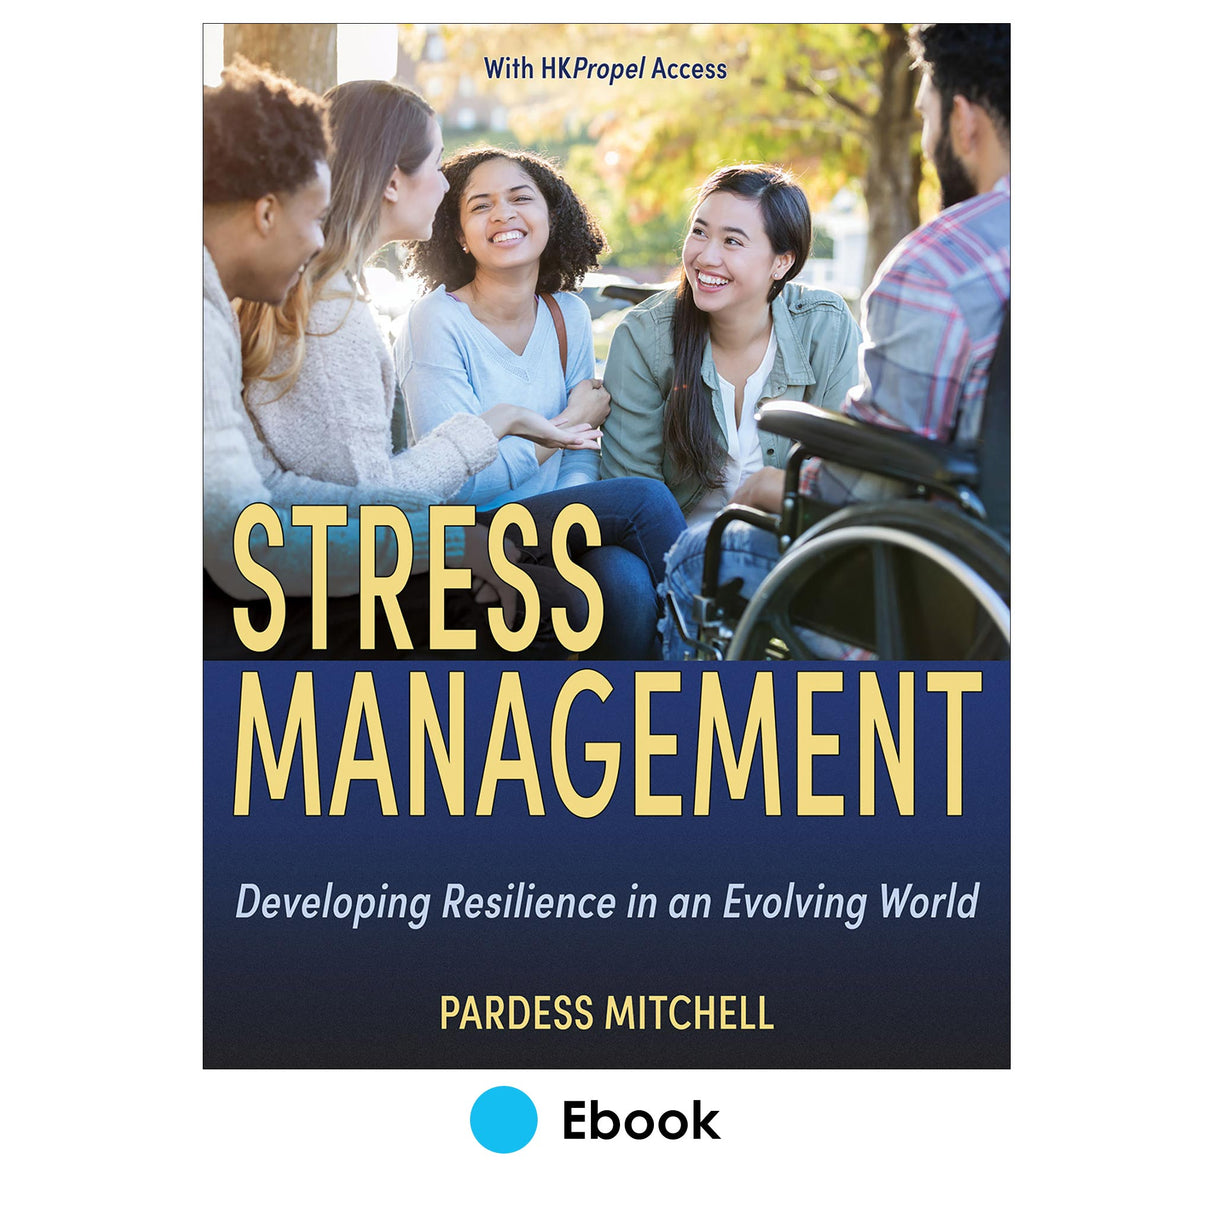 Stress Management Ebook With HKPropel Access